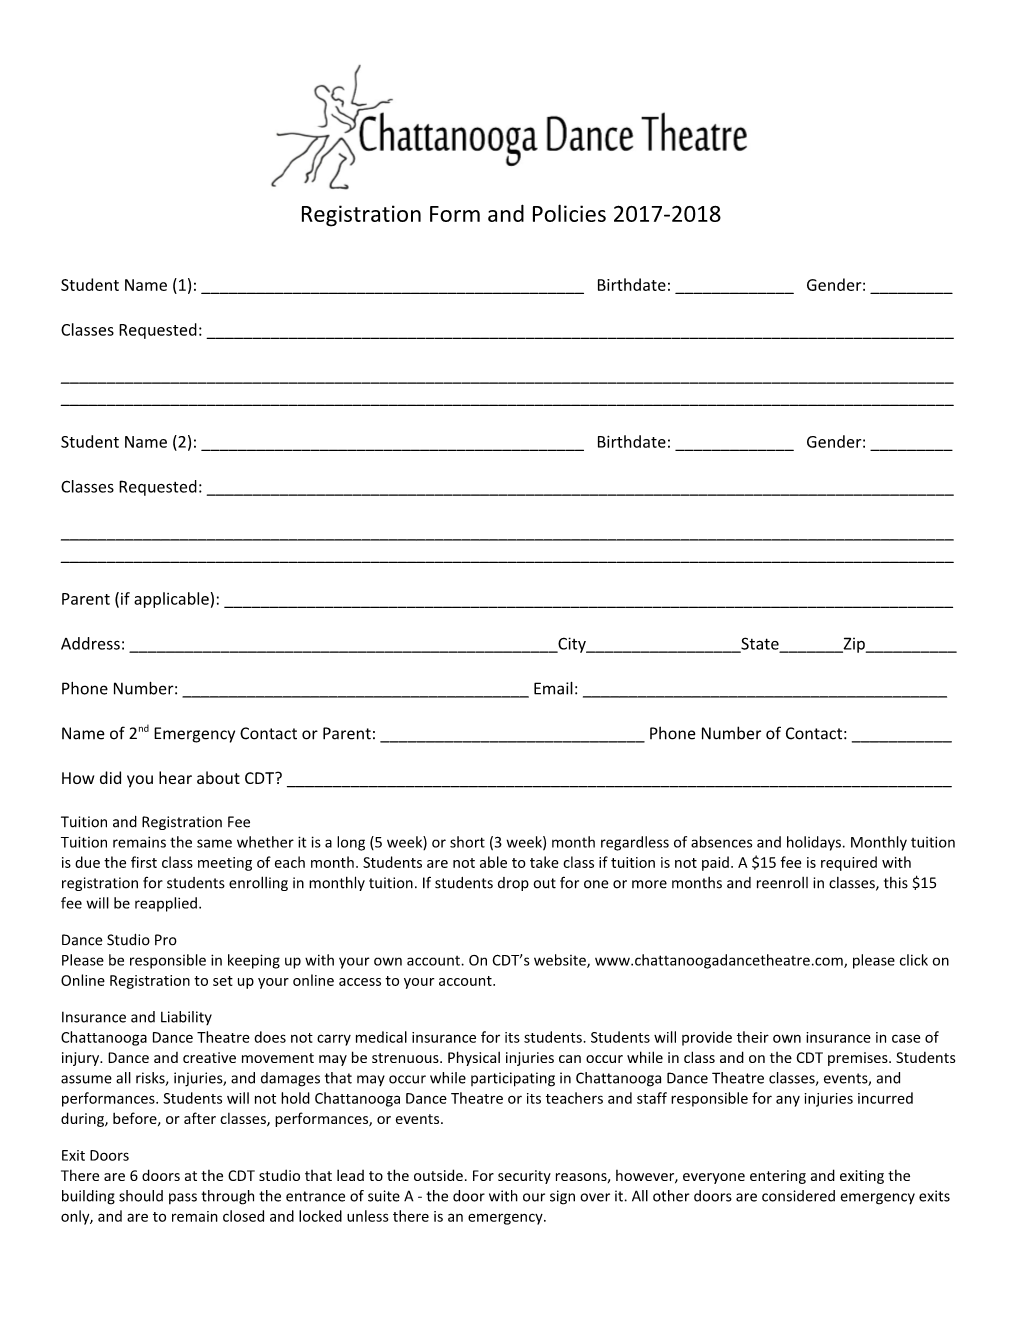 Registration Form and Policies 2017-2018